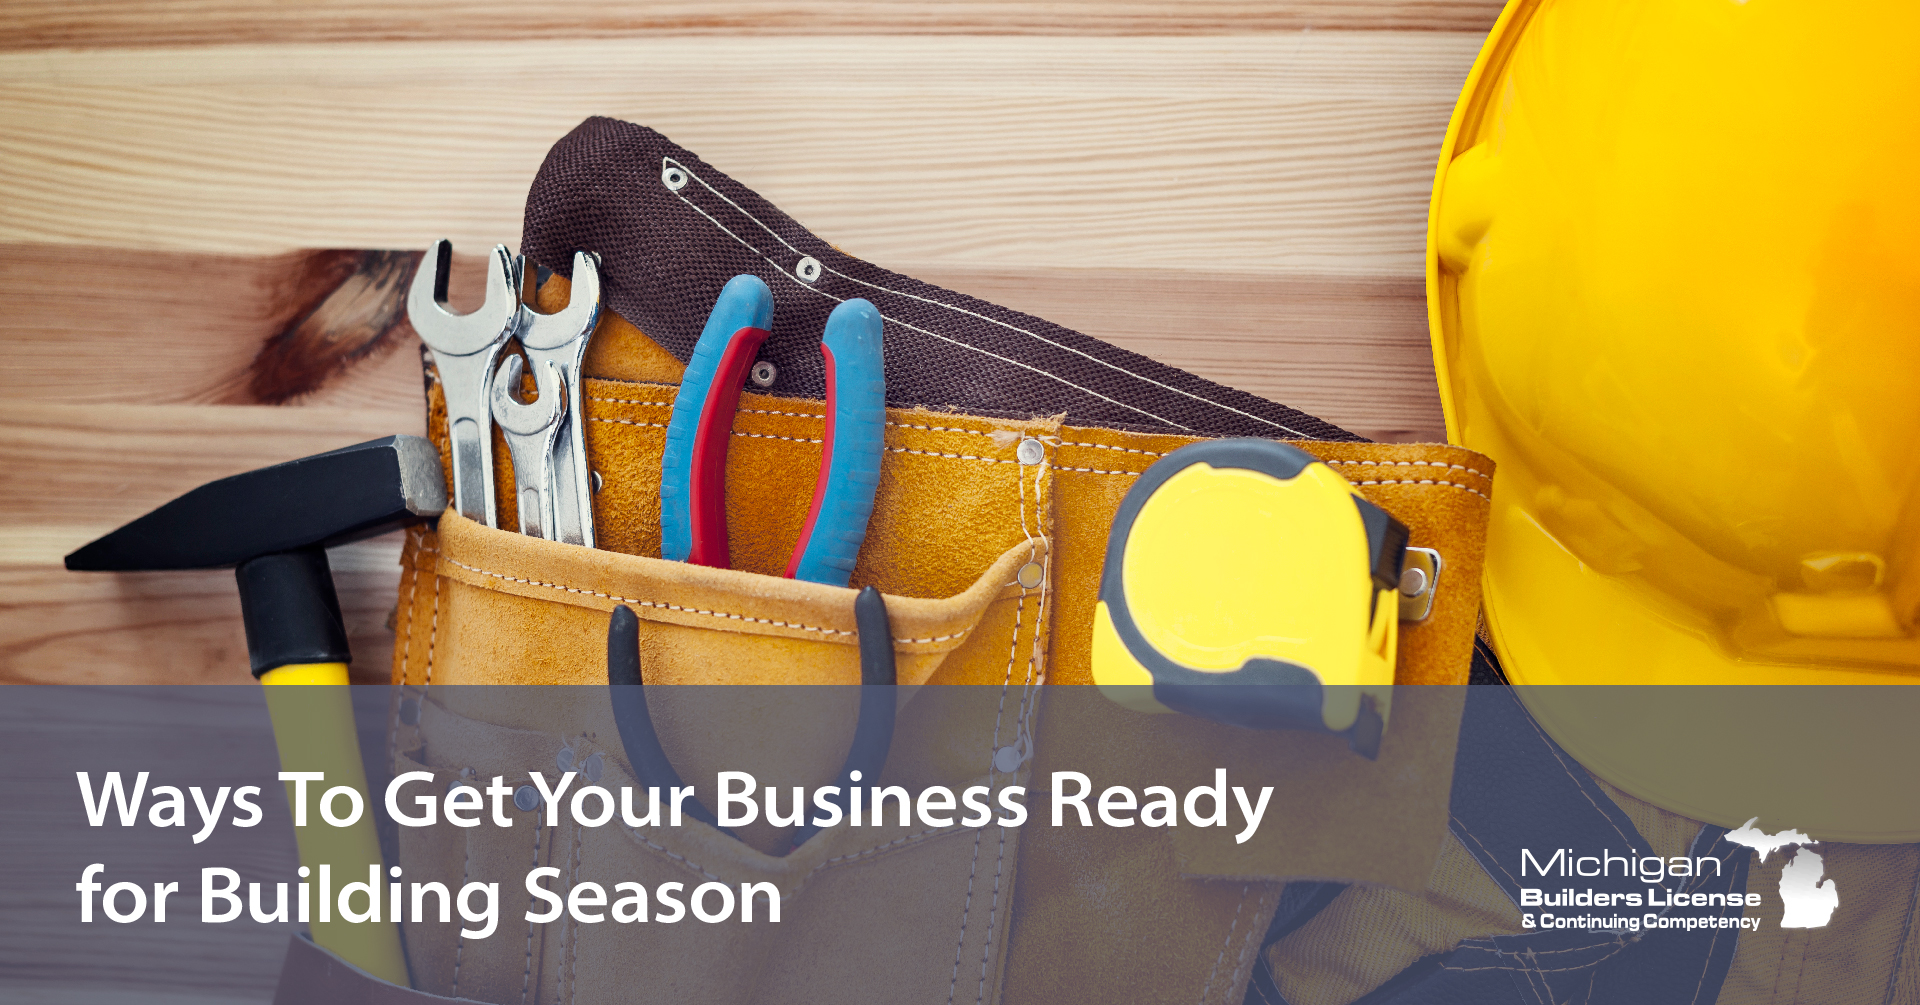 Ways To Get Your Business Ready for Building Season 